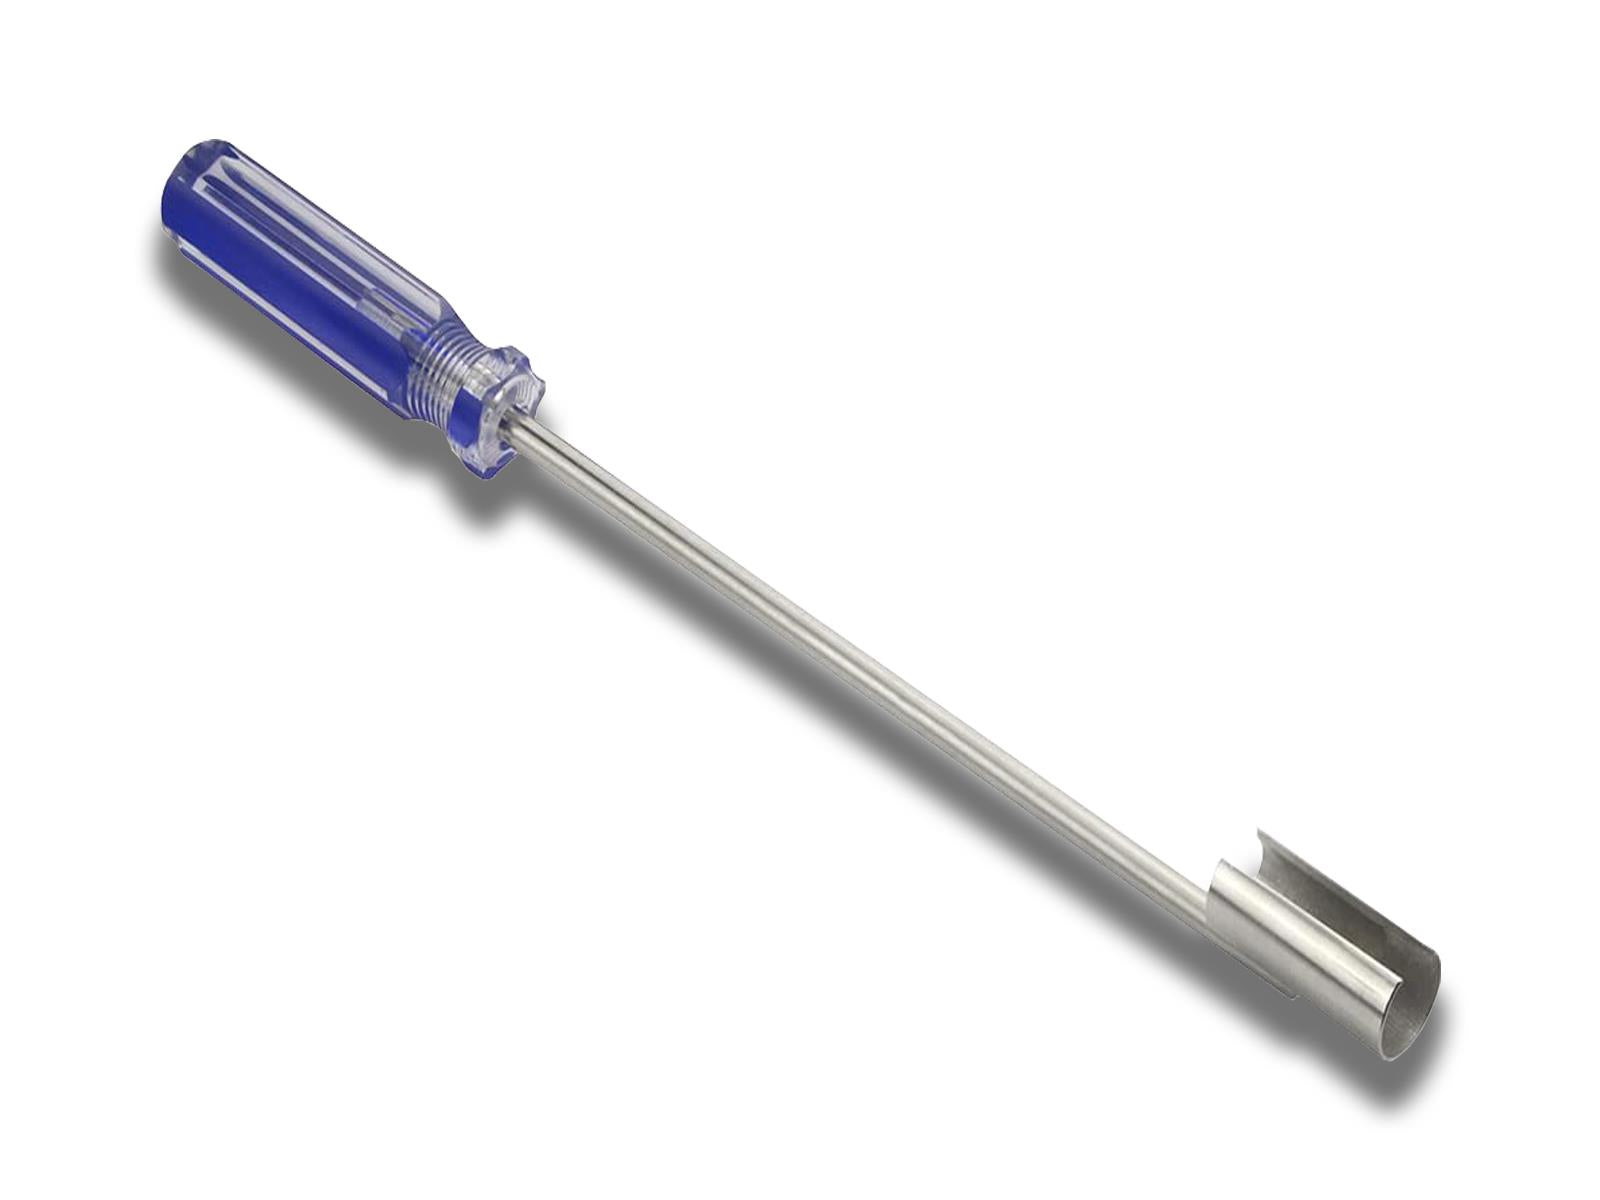 BNC Connector Extraction/Insertion Tool